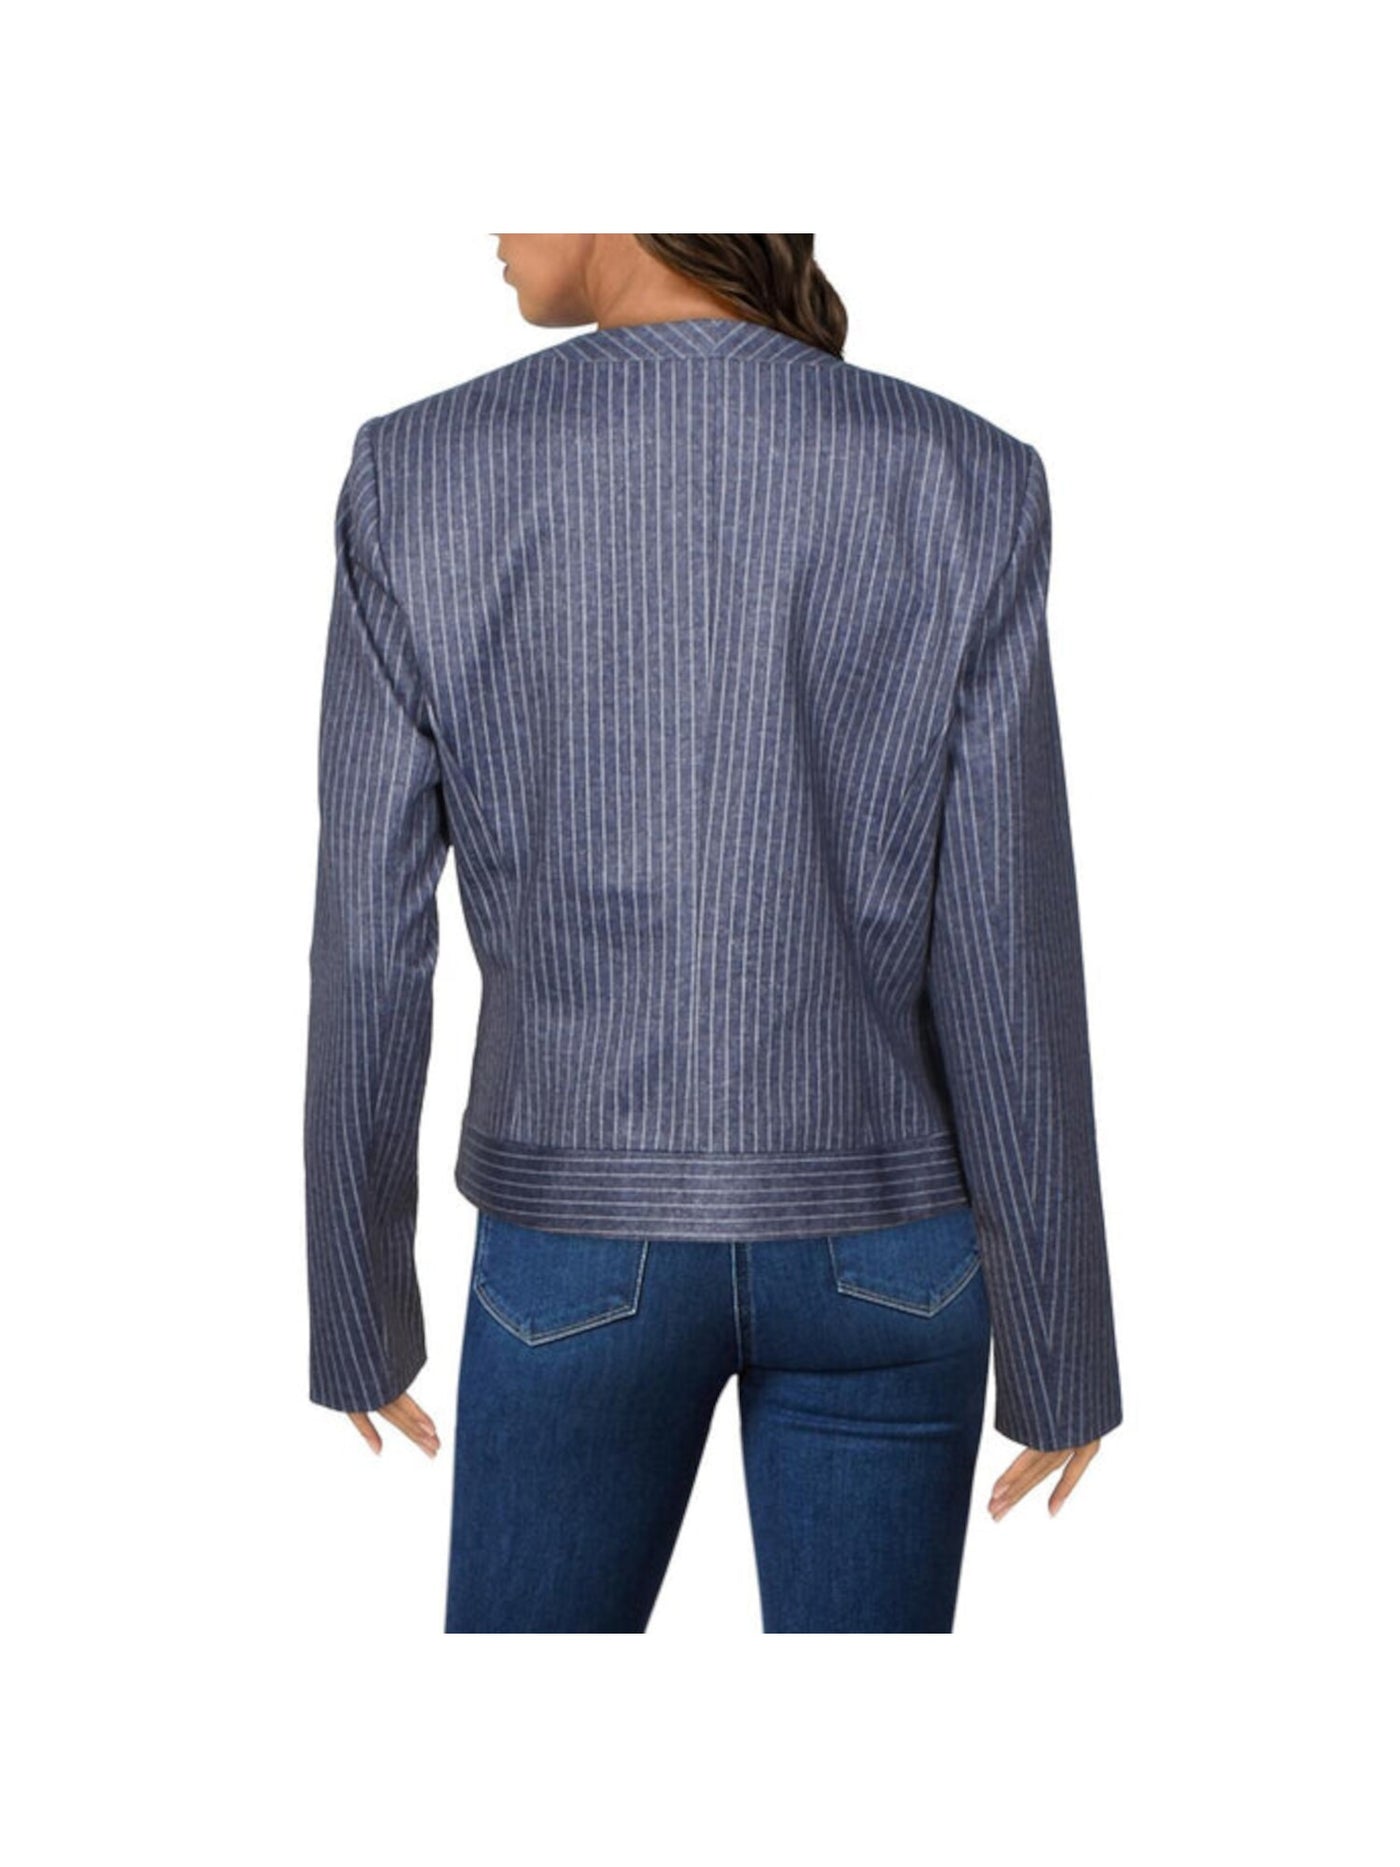 TOMMY HILFIGER Womens Blue Zippered Pocketed Lined Fitted Pinstripe Long Sleeve Collarless Wear To Work Blazer Jacket 12